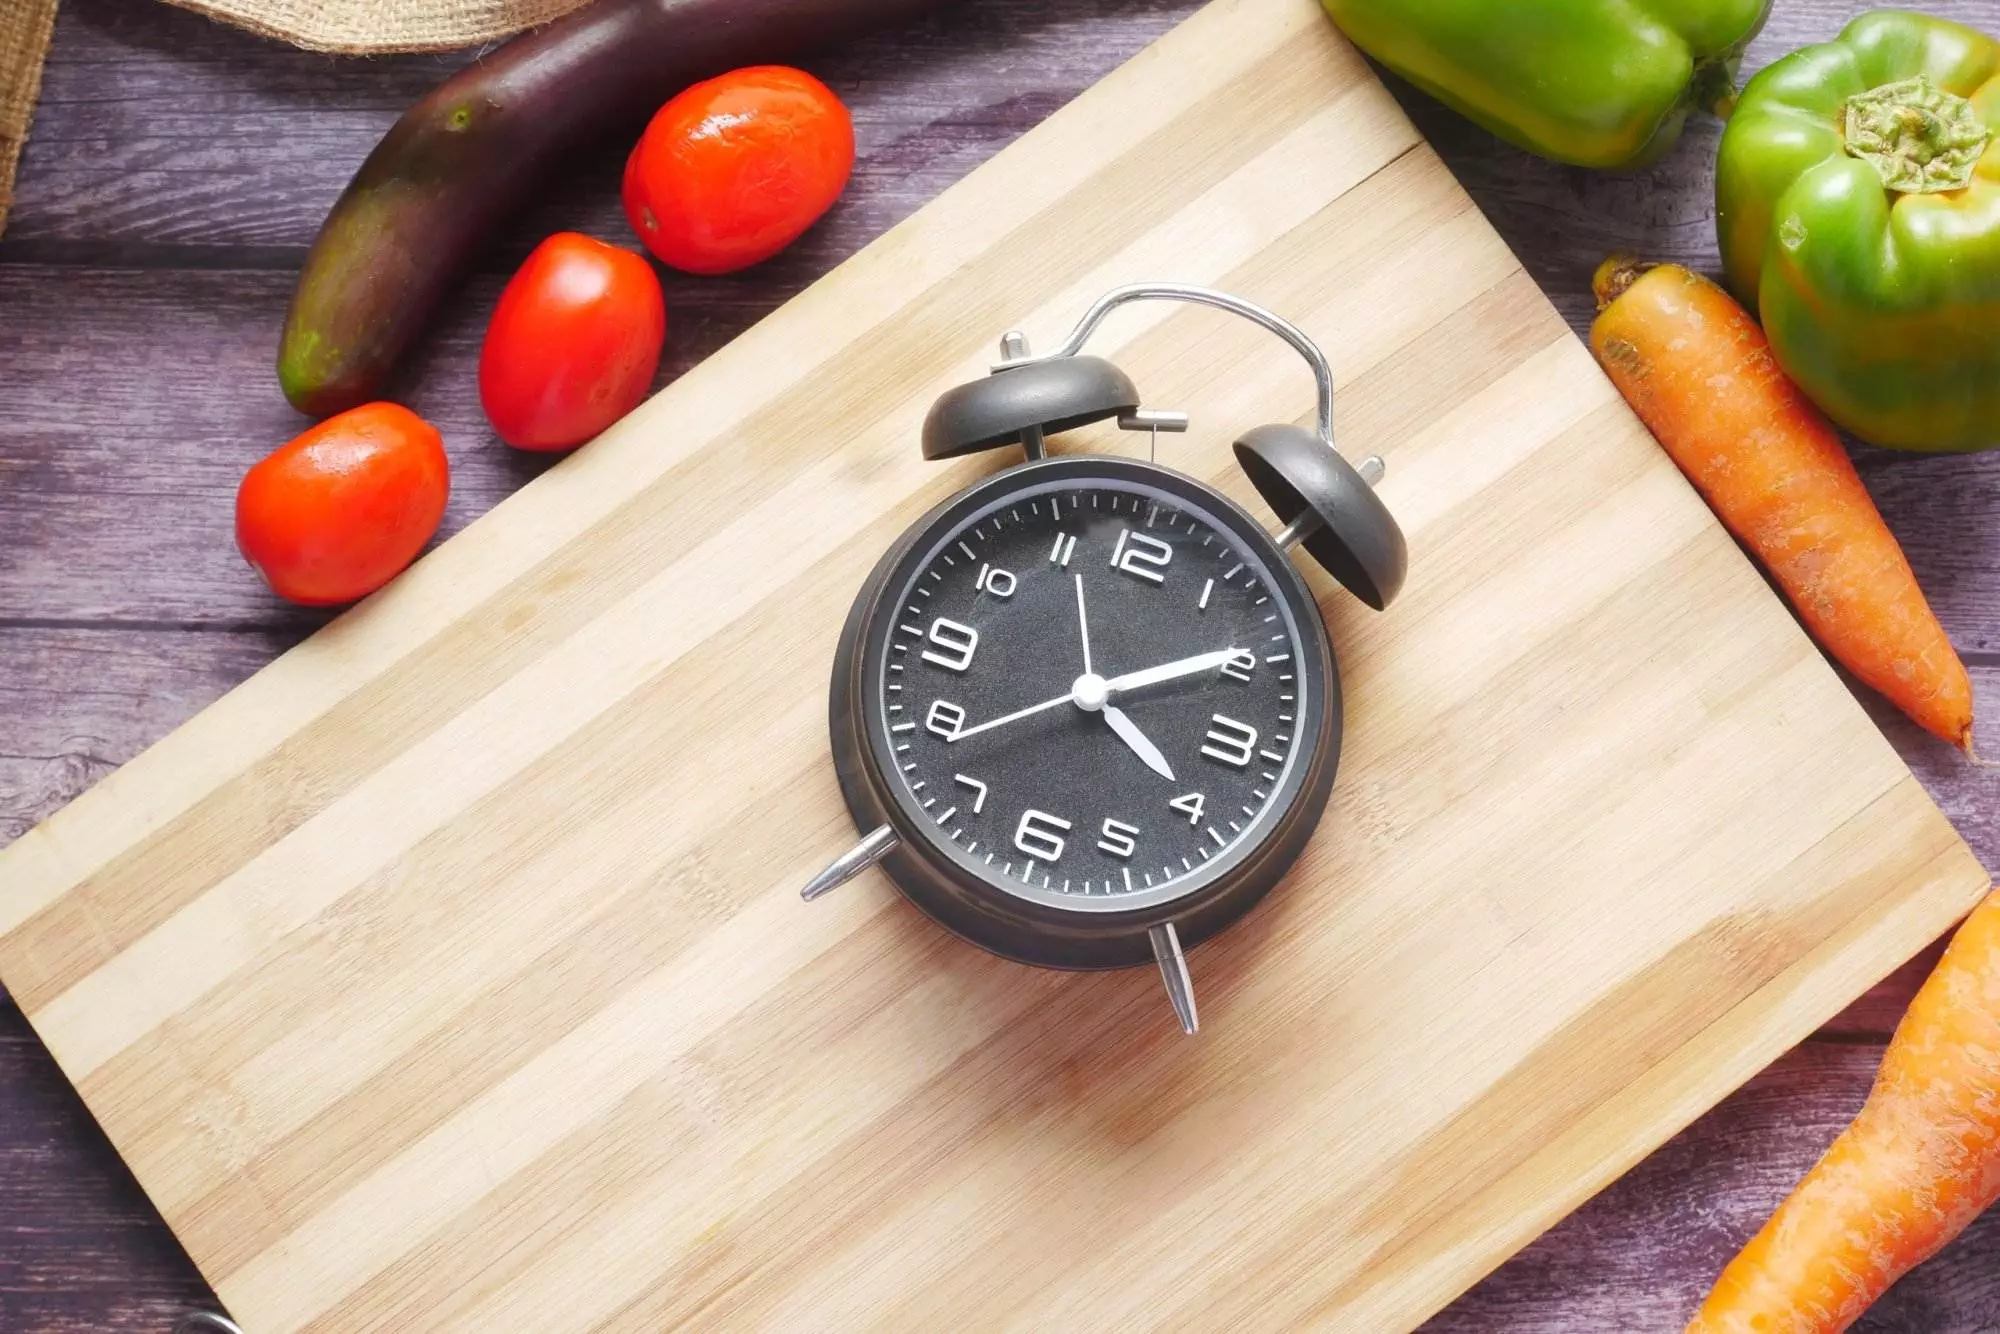 Alarm clock on cutting board with vegetables.